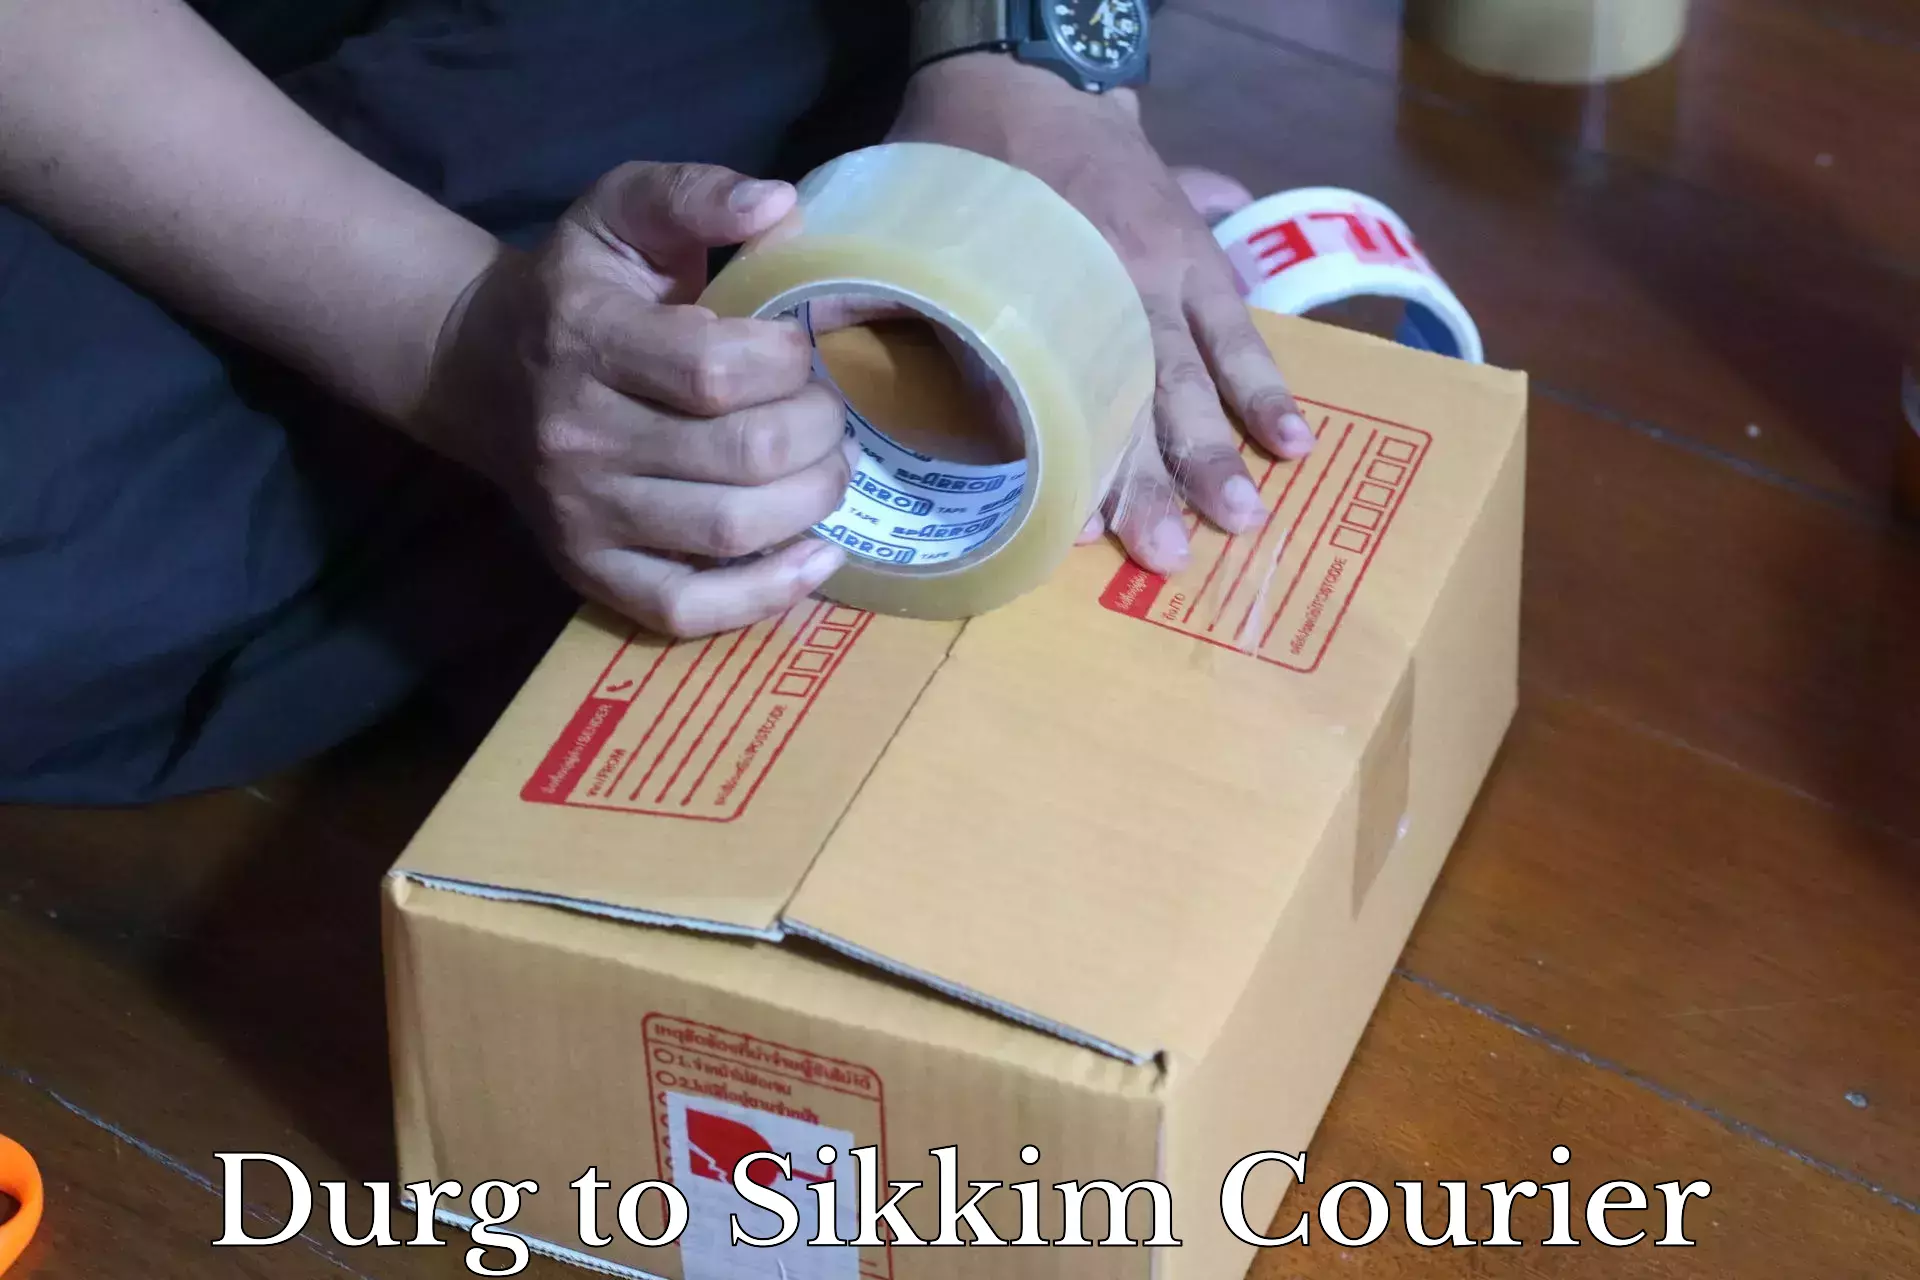 Subscription-based courier Durg to Sikkim